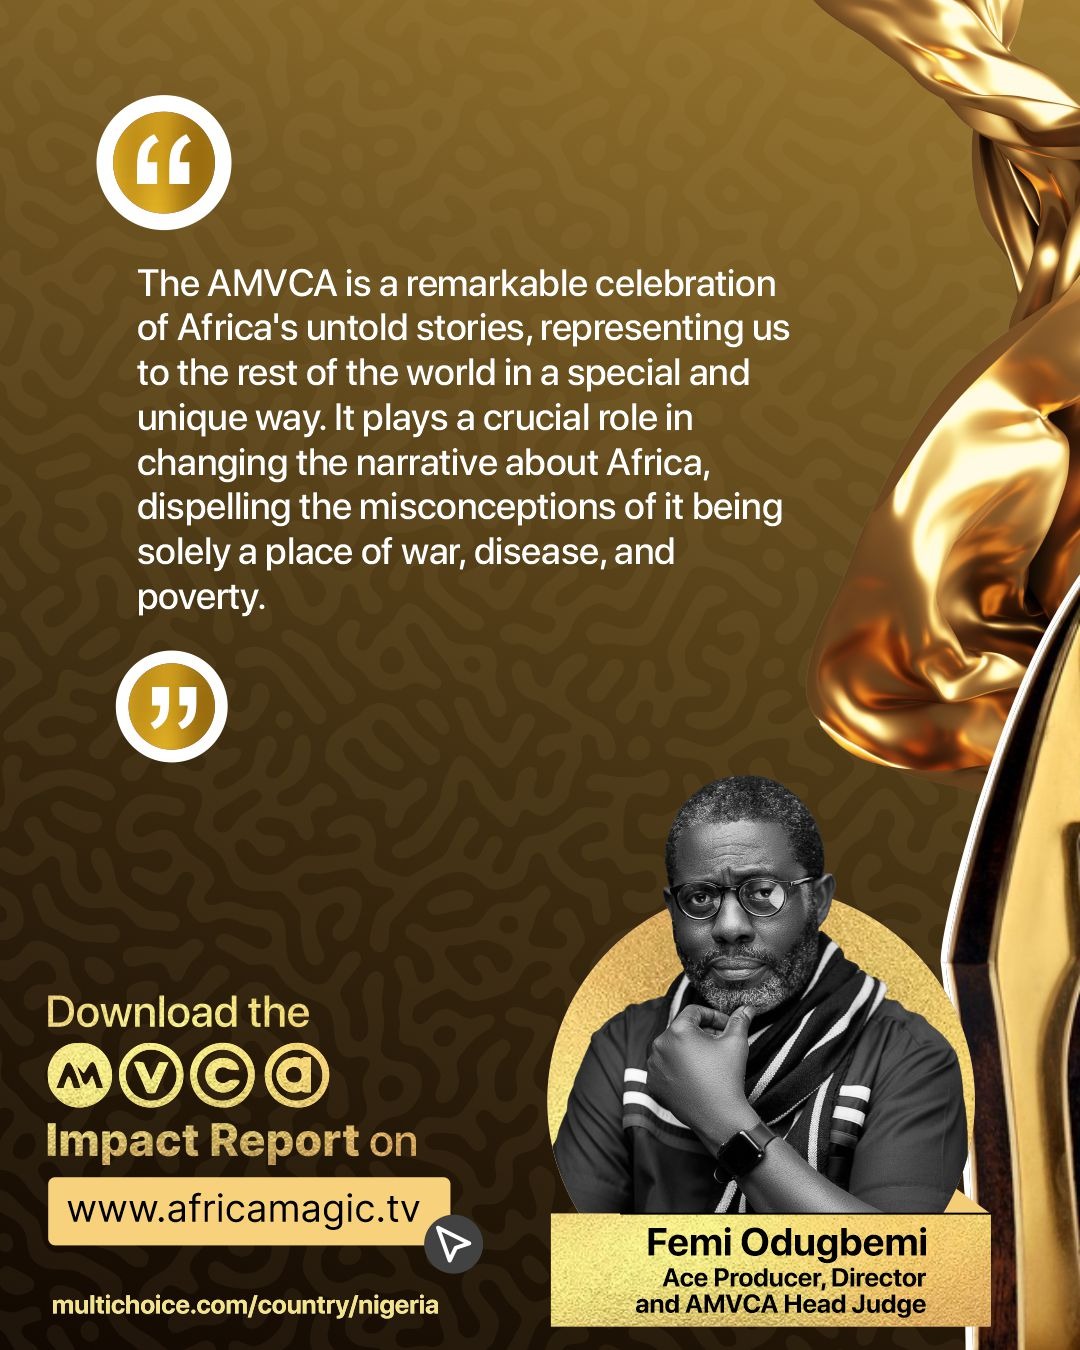 Femi Quote - Multichoice Reveals N9Billion Investment in AMVCA and Awards Impact Report On Film/TV Sector